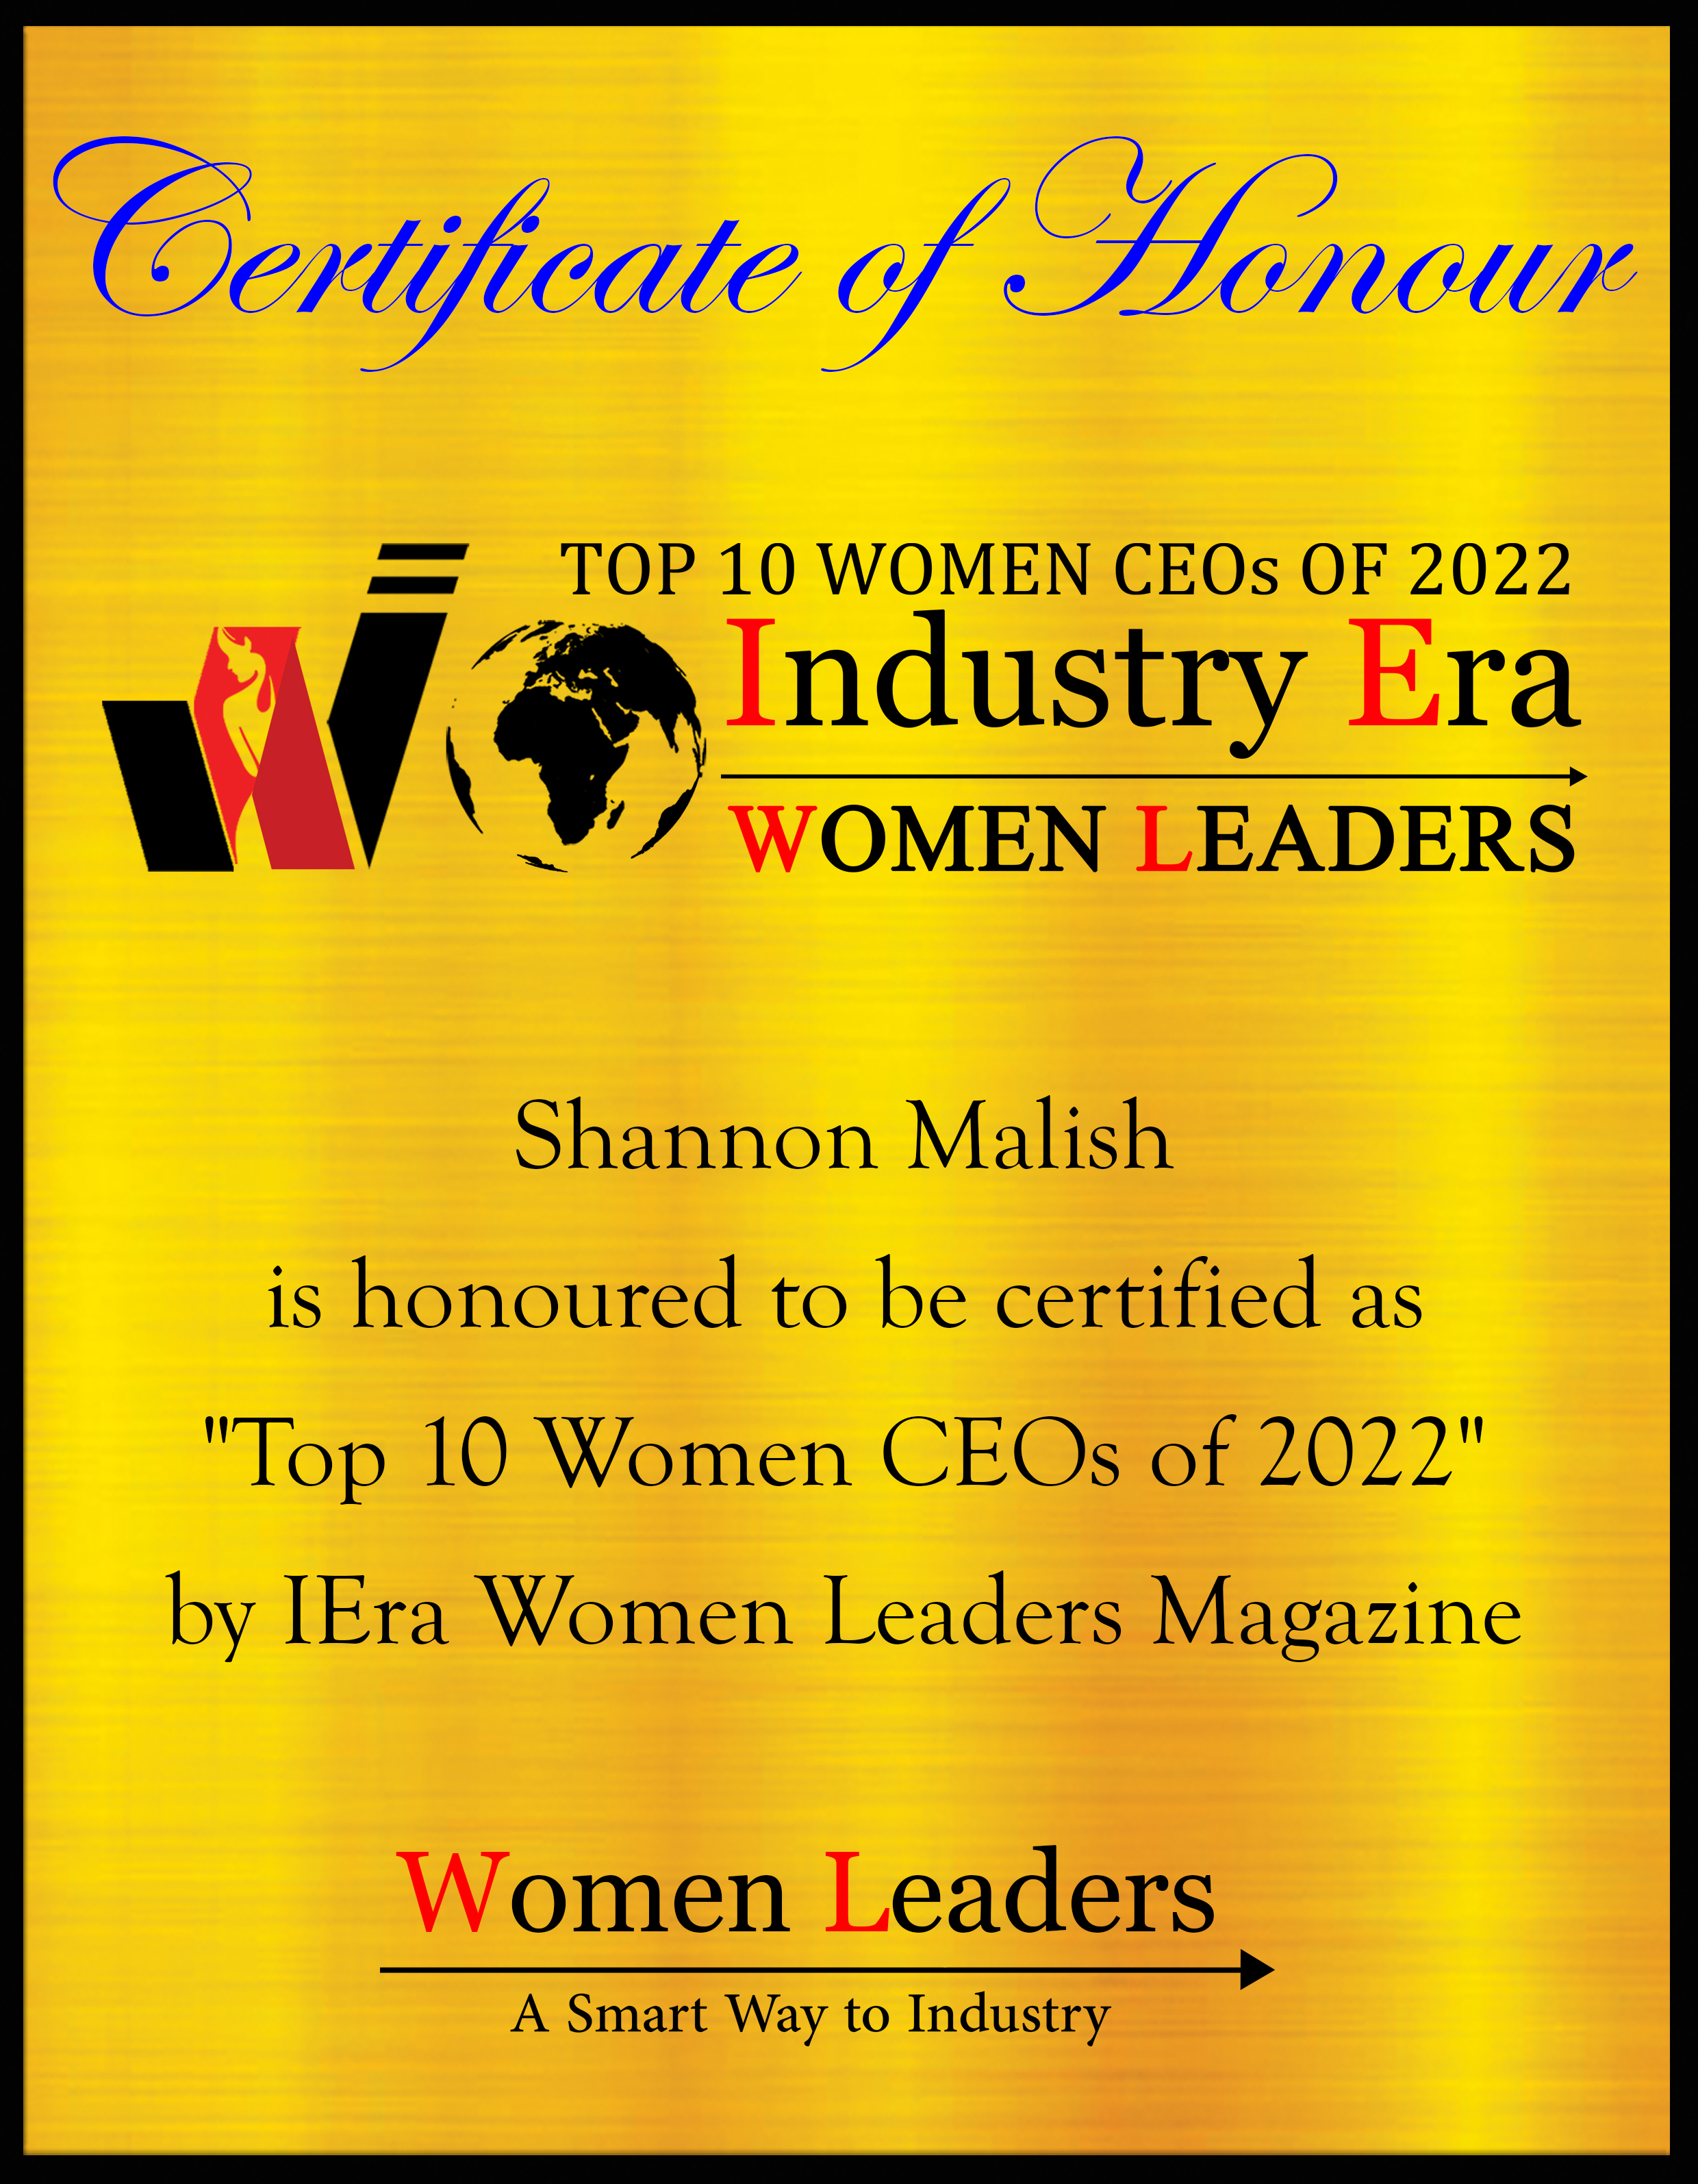 Shannon Malish Founder & CEO of Windmill Wellness Ranch, Top 10 Women CEOs of 2022